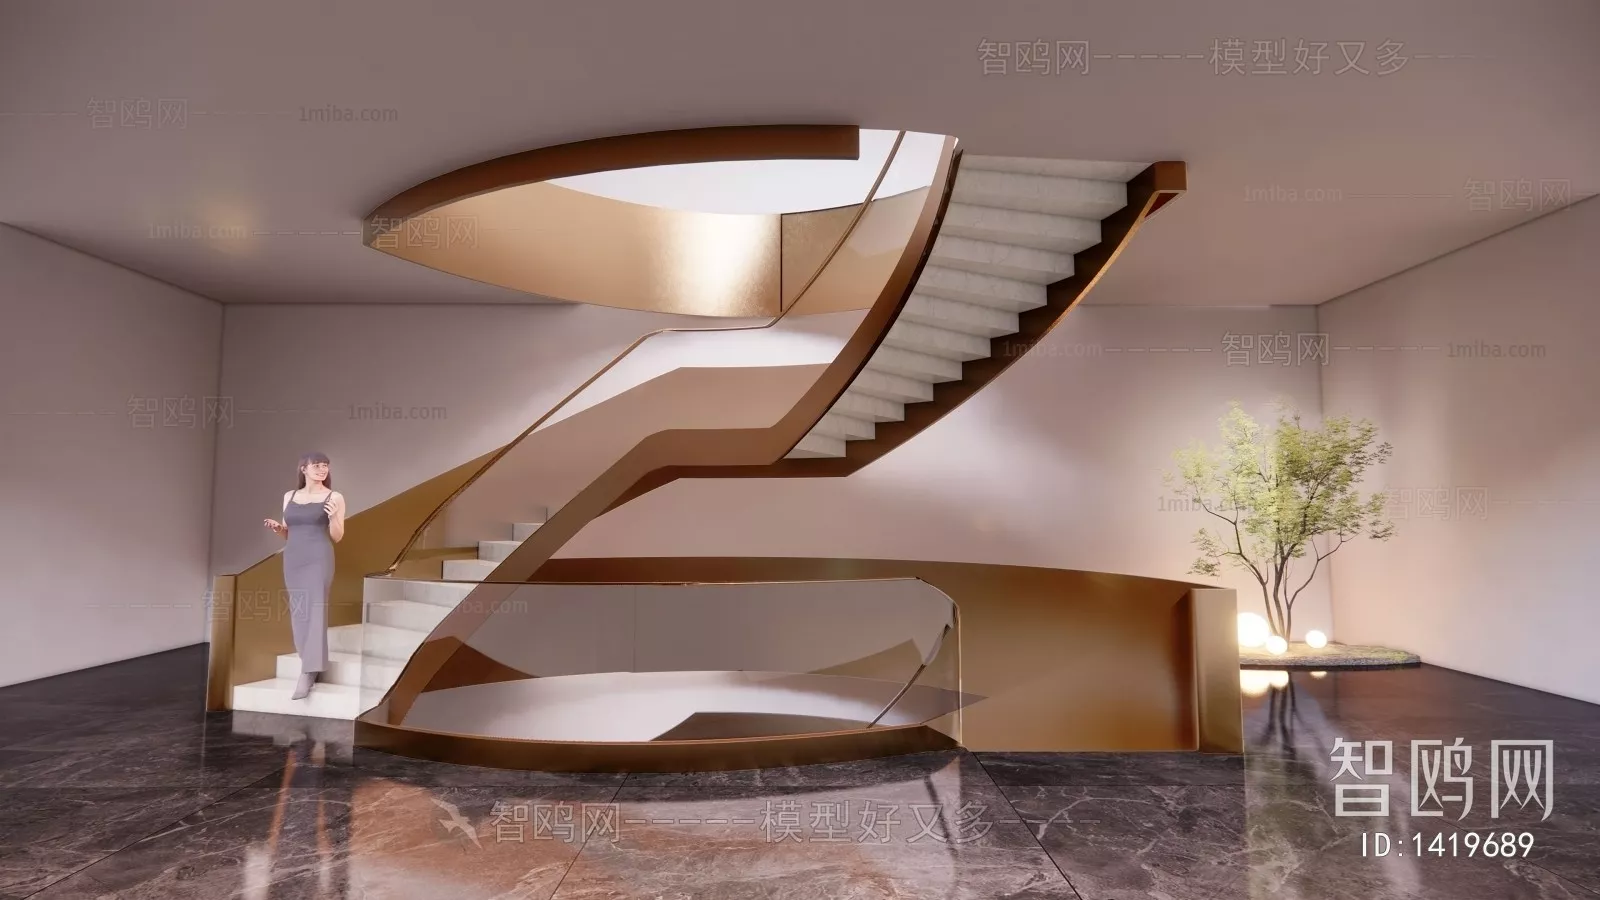 MODERN STAIR - SKETCHUP 3D MODEL - VRAY OR ENSCAPE - ID14310